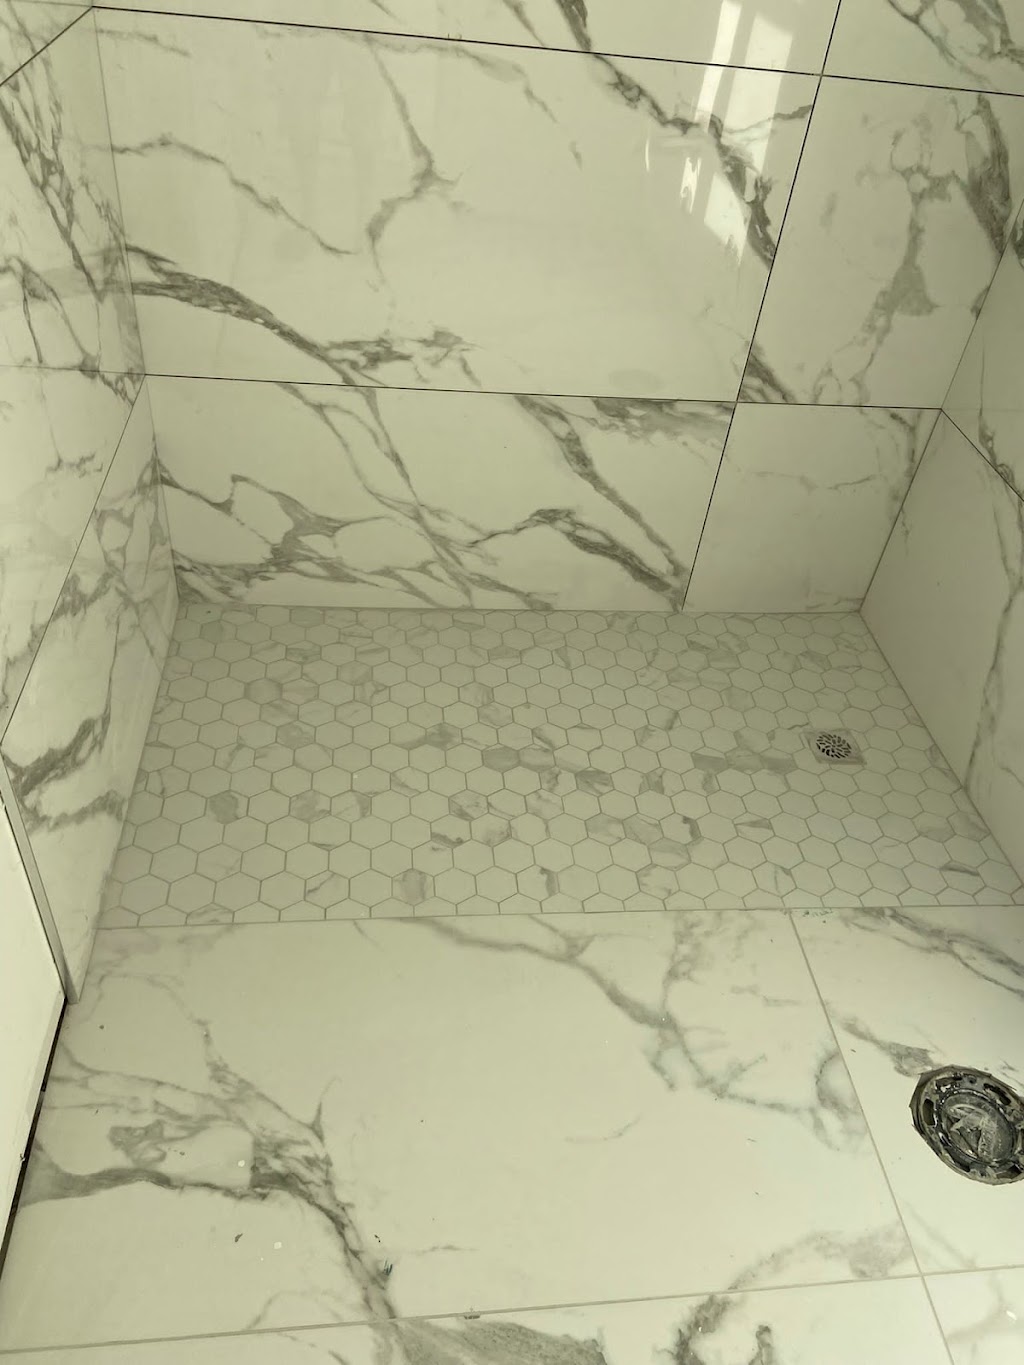 New style tile Ltd | 6905 151a St, Surrey, BC V3S 7Y7, Canada | Phone: (604) 807-6146